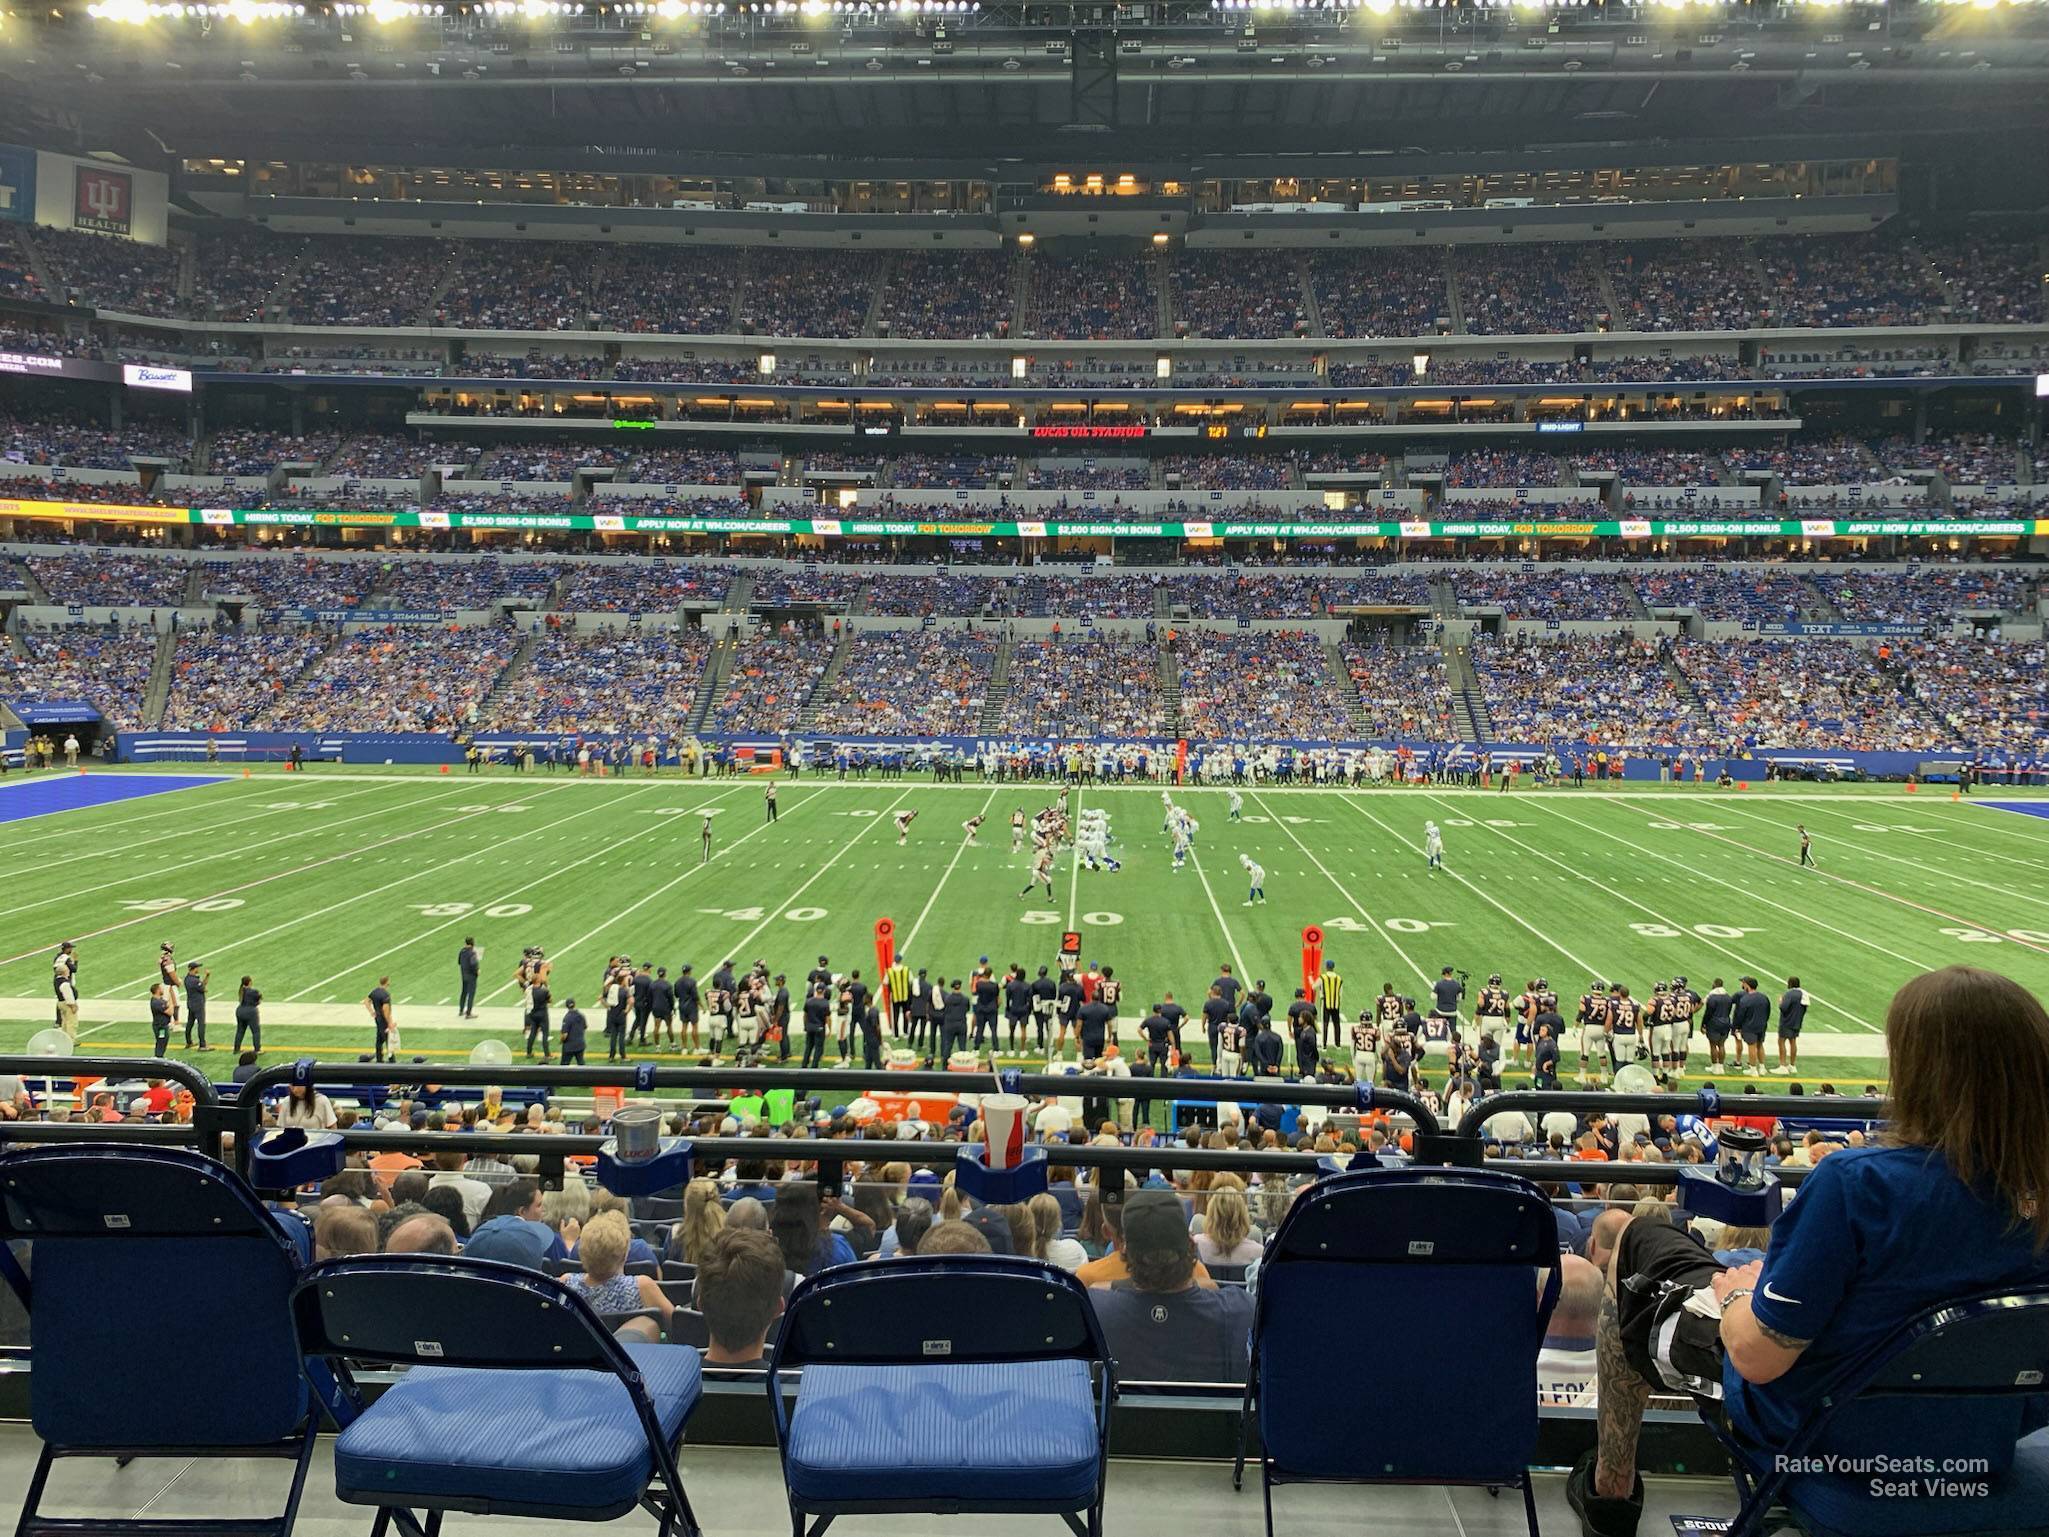 section 113, row 24w seat view  for football - lucas oil stadium